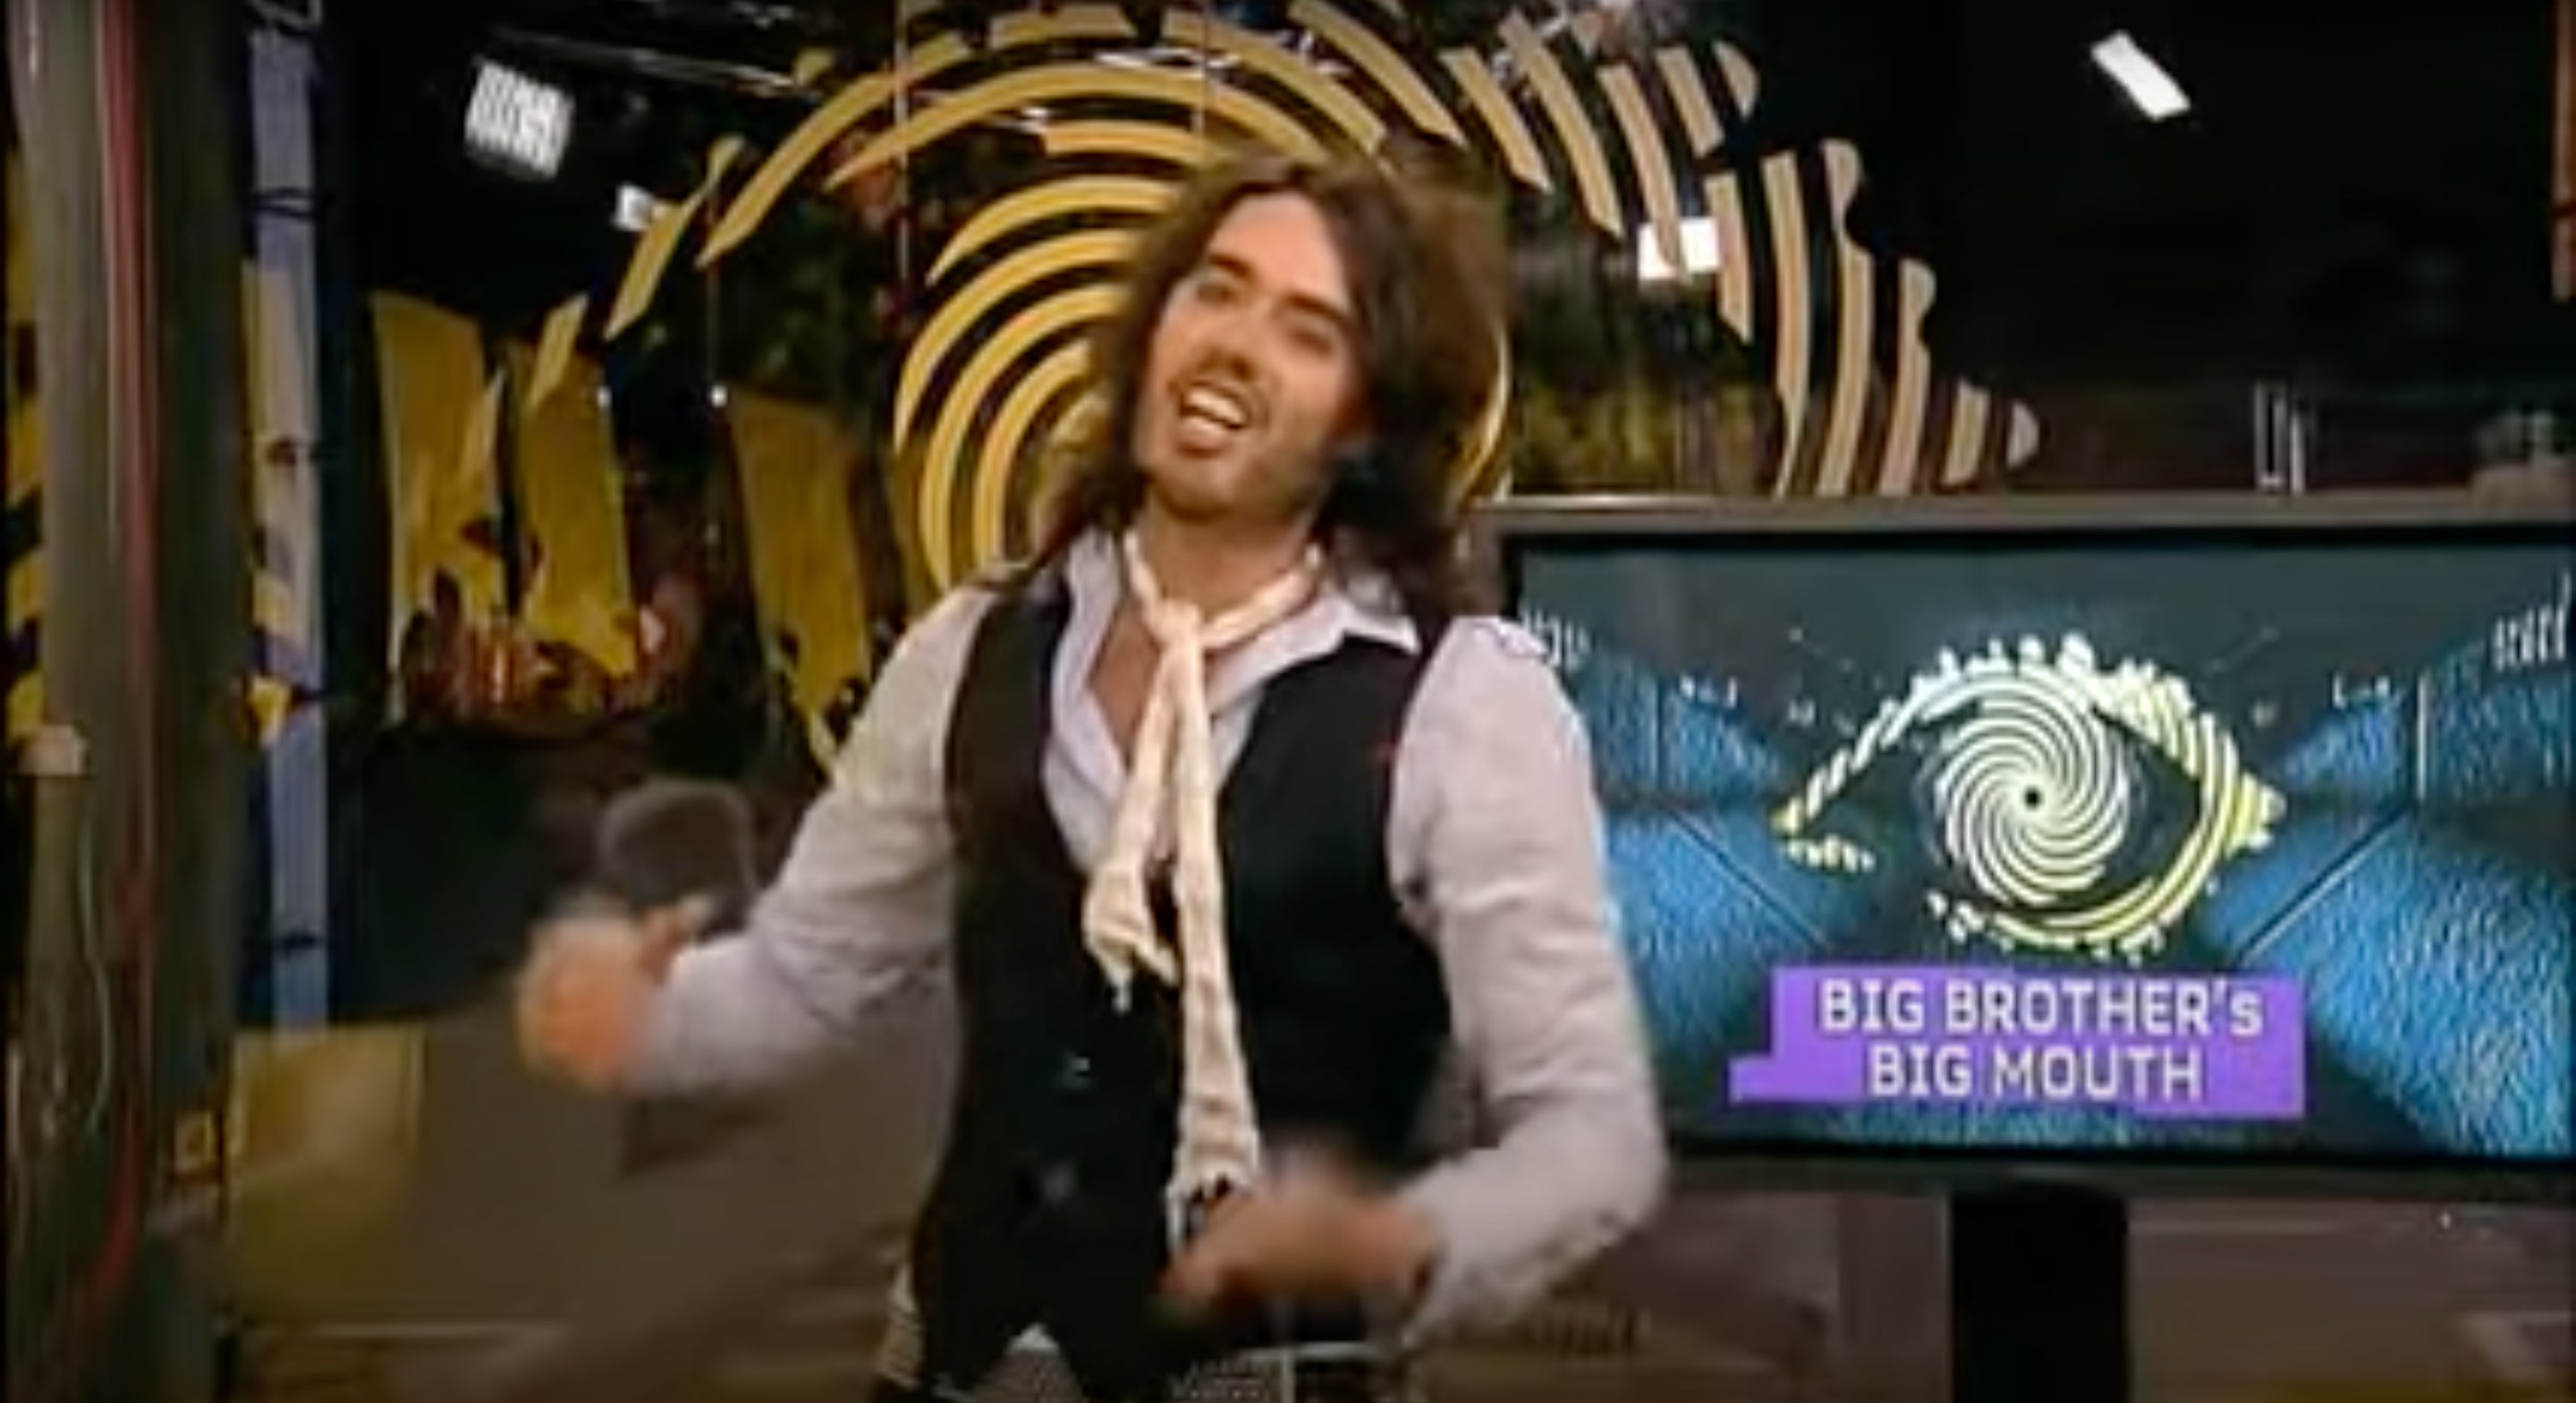 Brand hosting ‘Big Brother’s Big Mouth’ in 2006